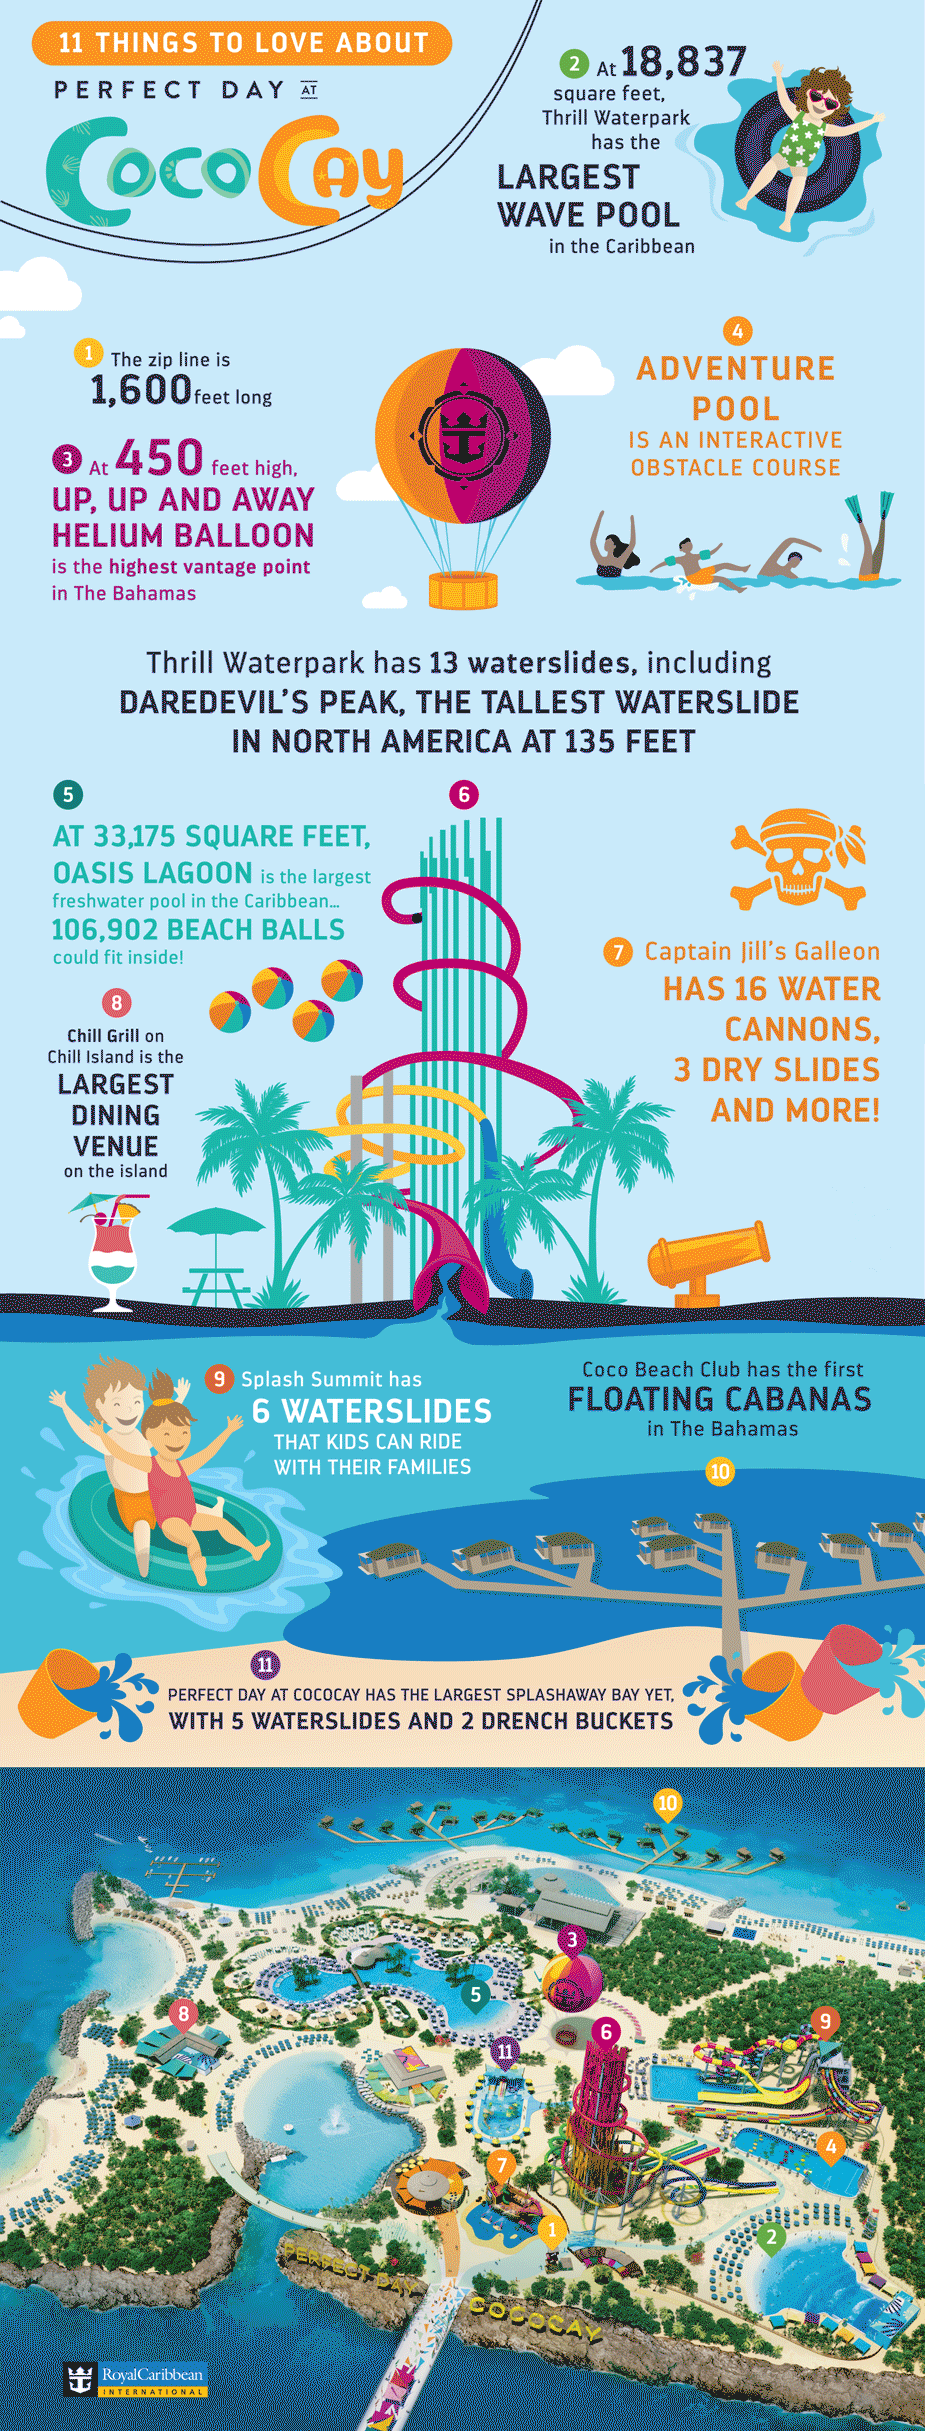 Perfect Day at CocoCay Animated Infographic